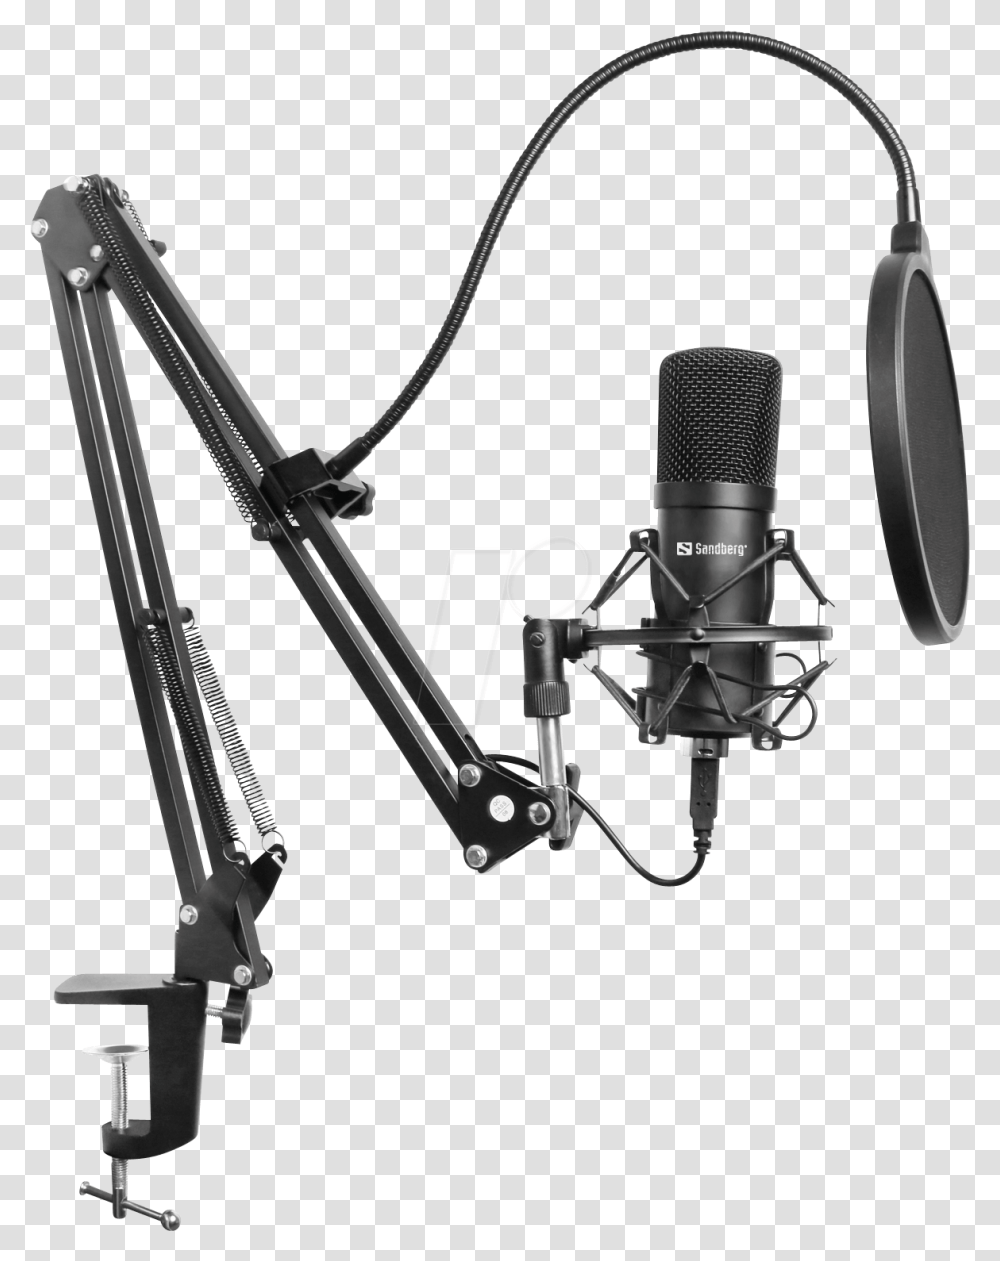 Sandberg 126 07 Microphone Usb Streamer Streamer Microphone, Bow, Electrical Device Transparent Png